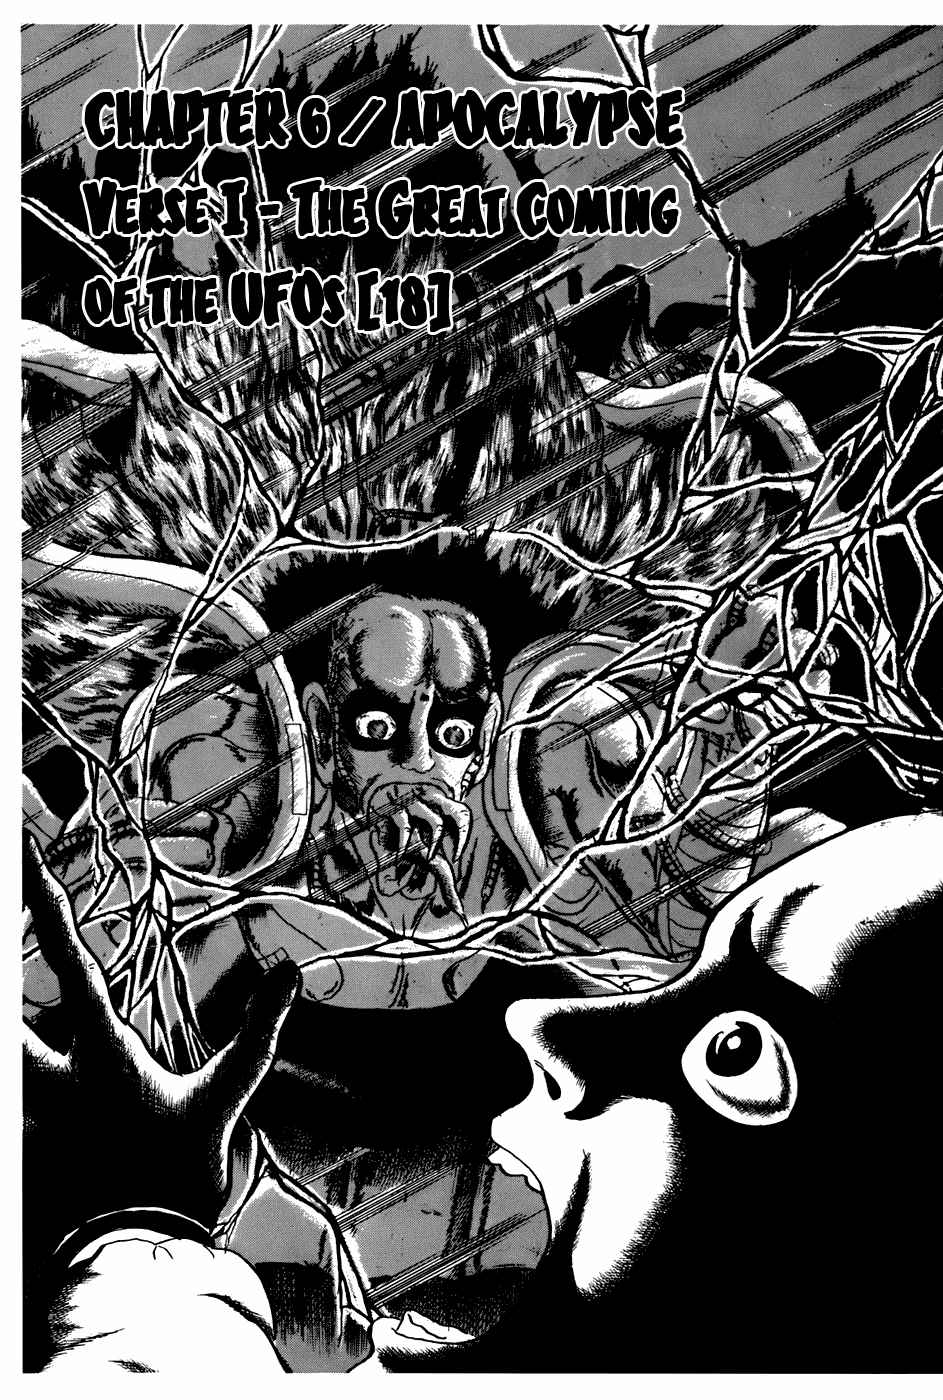 Fourteen Vol. 9 Ch. 170 Apocalypse Verse I The Great Coming of the UFOs (18)